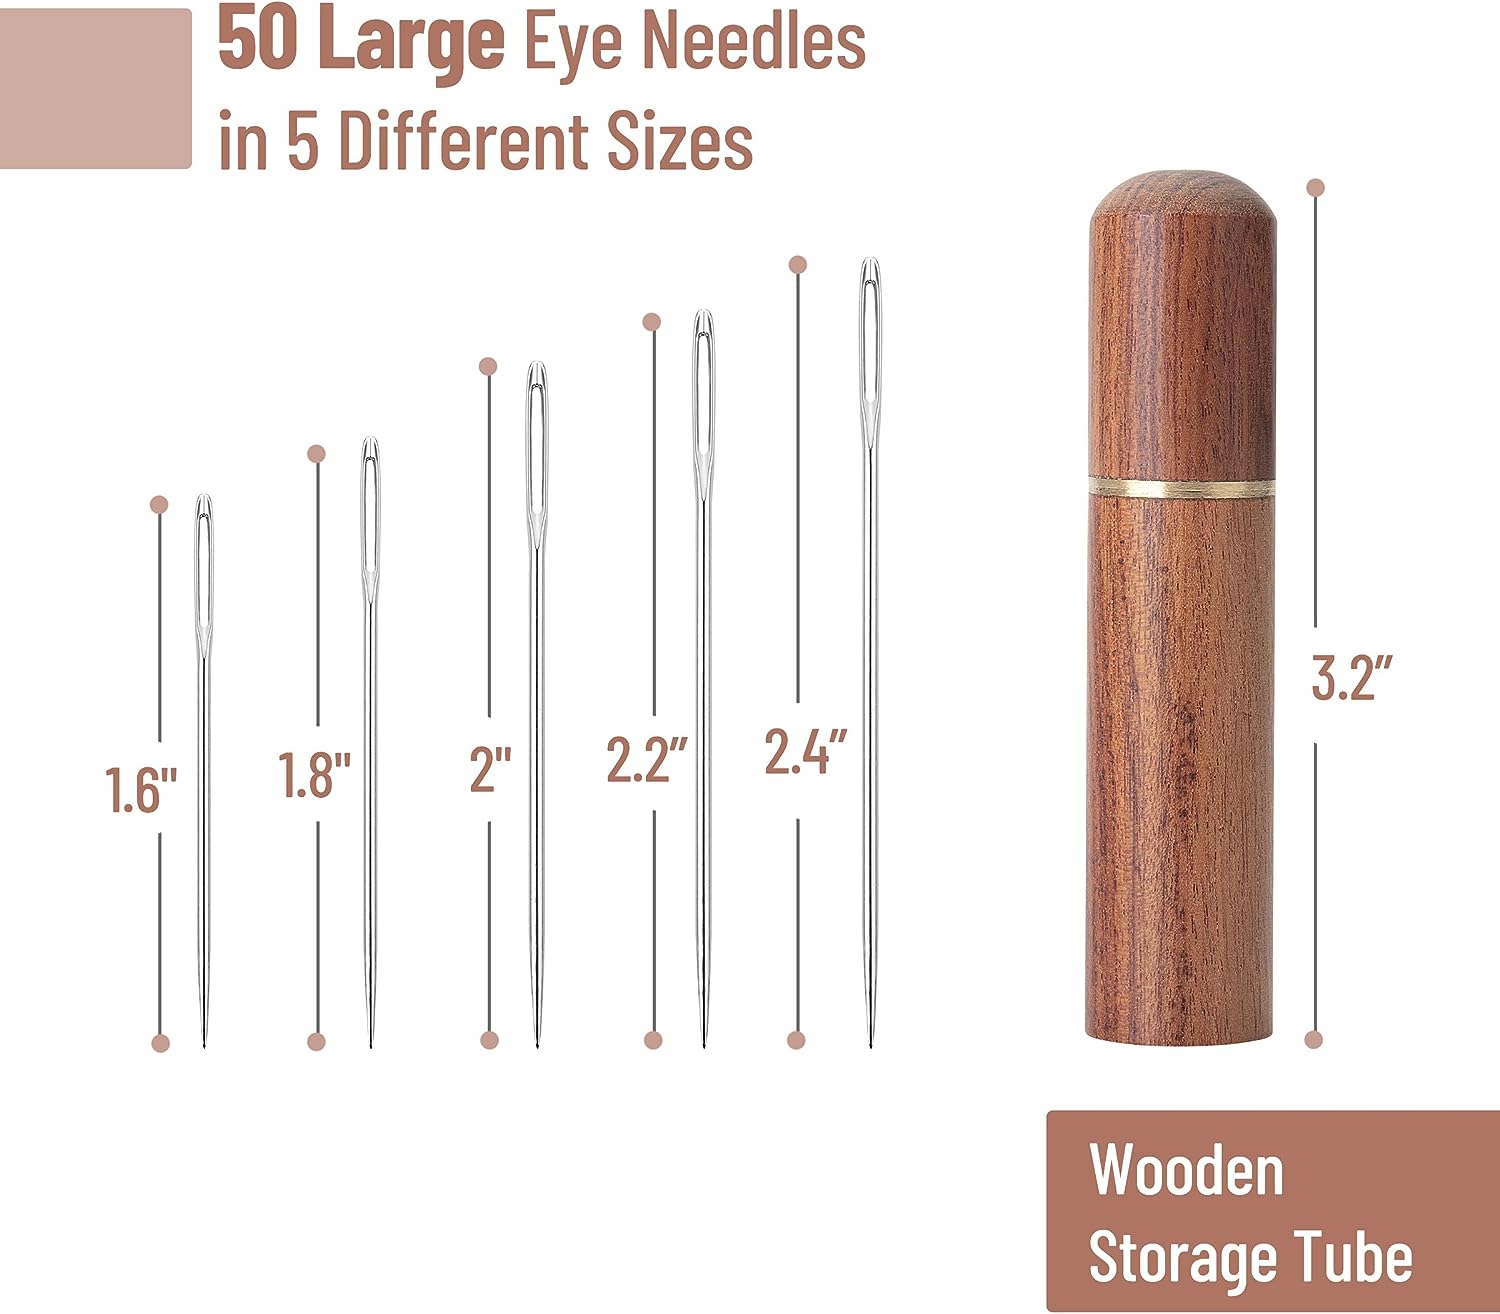 Large Eye Needles for Hand Sewing, 50 pcs, Assorted Sizes with Wooden  Storage Tube - Mr. Pen Store